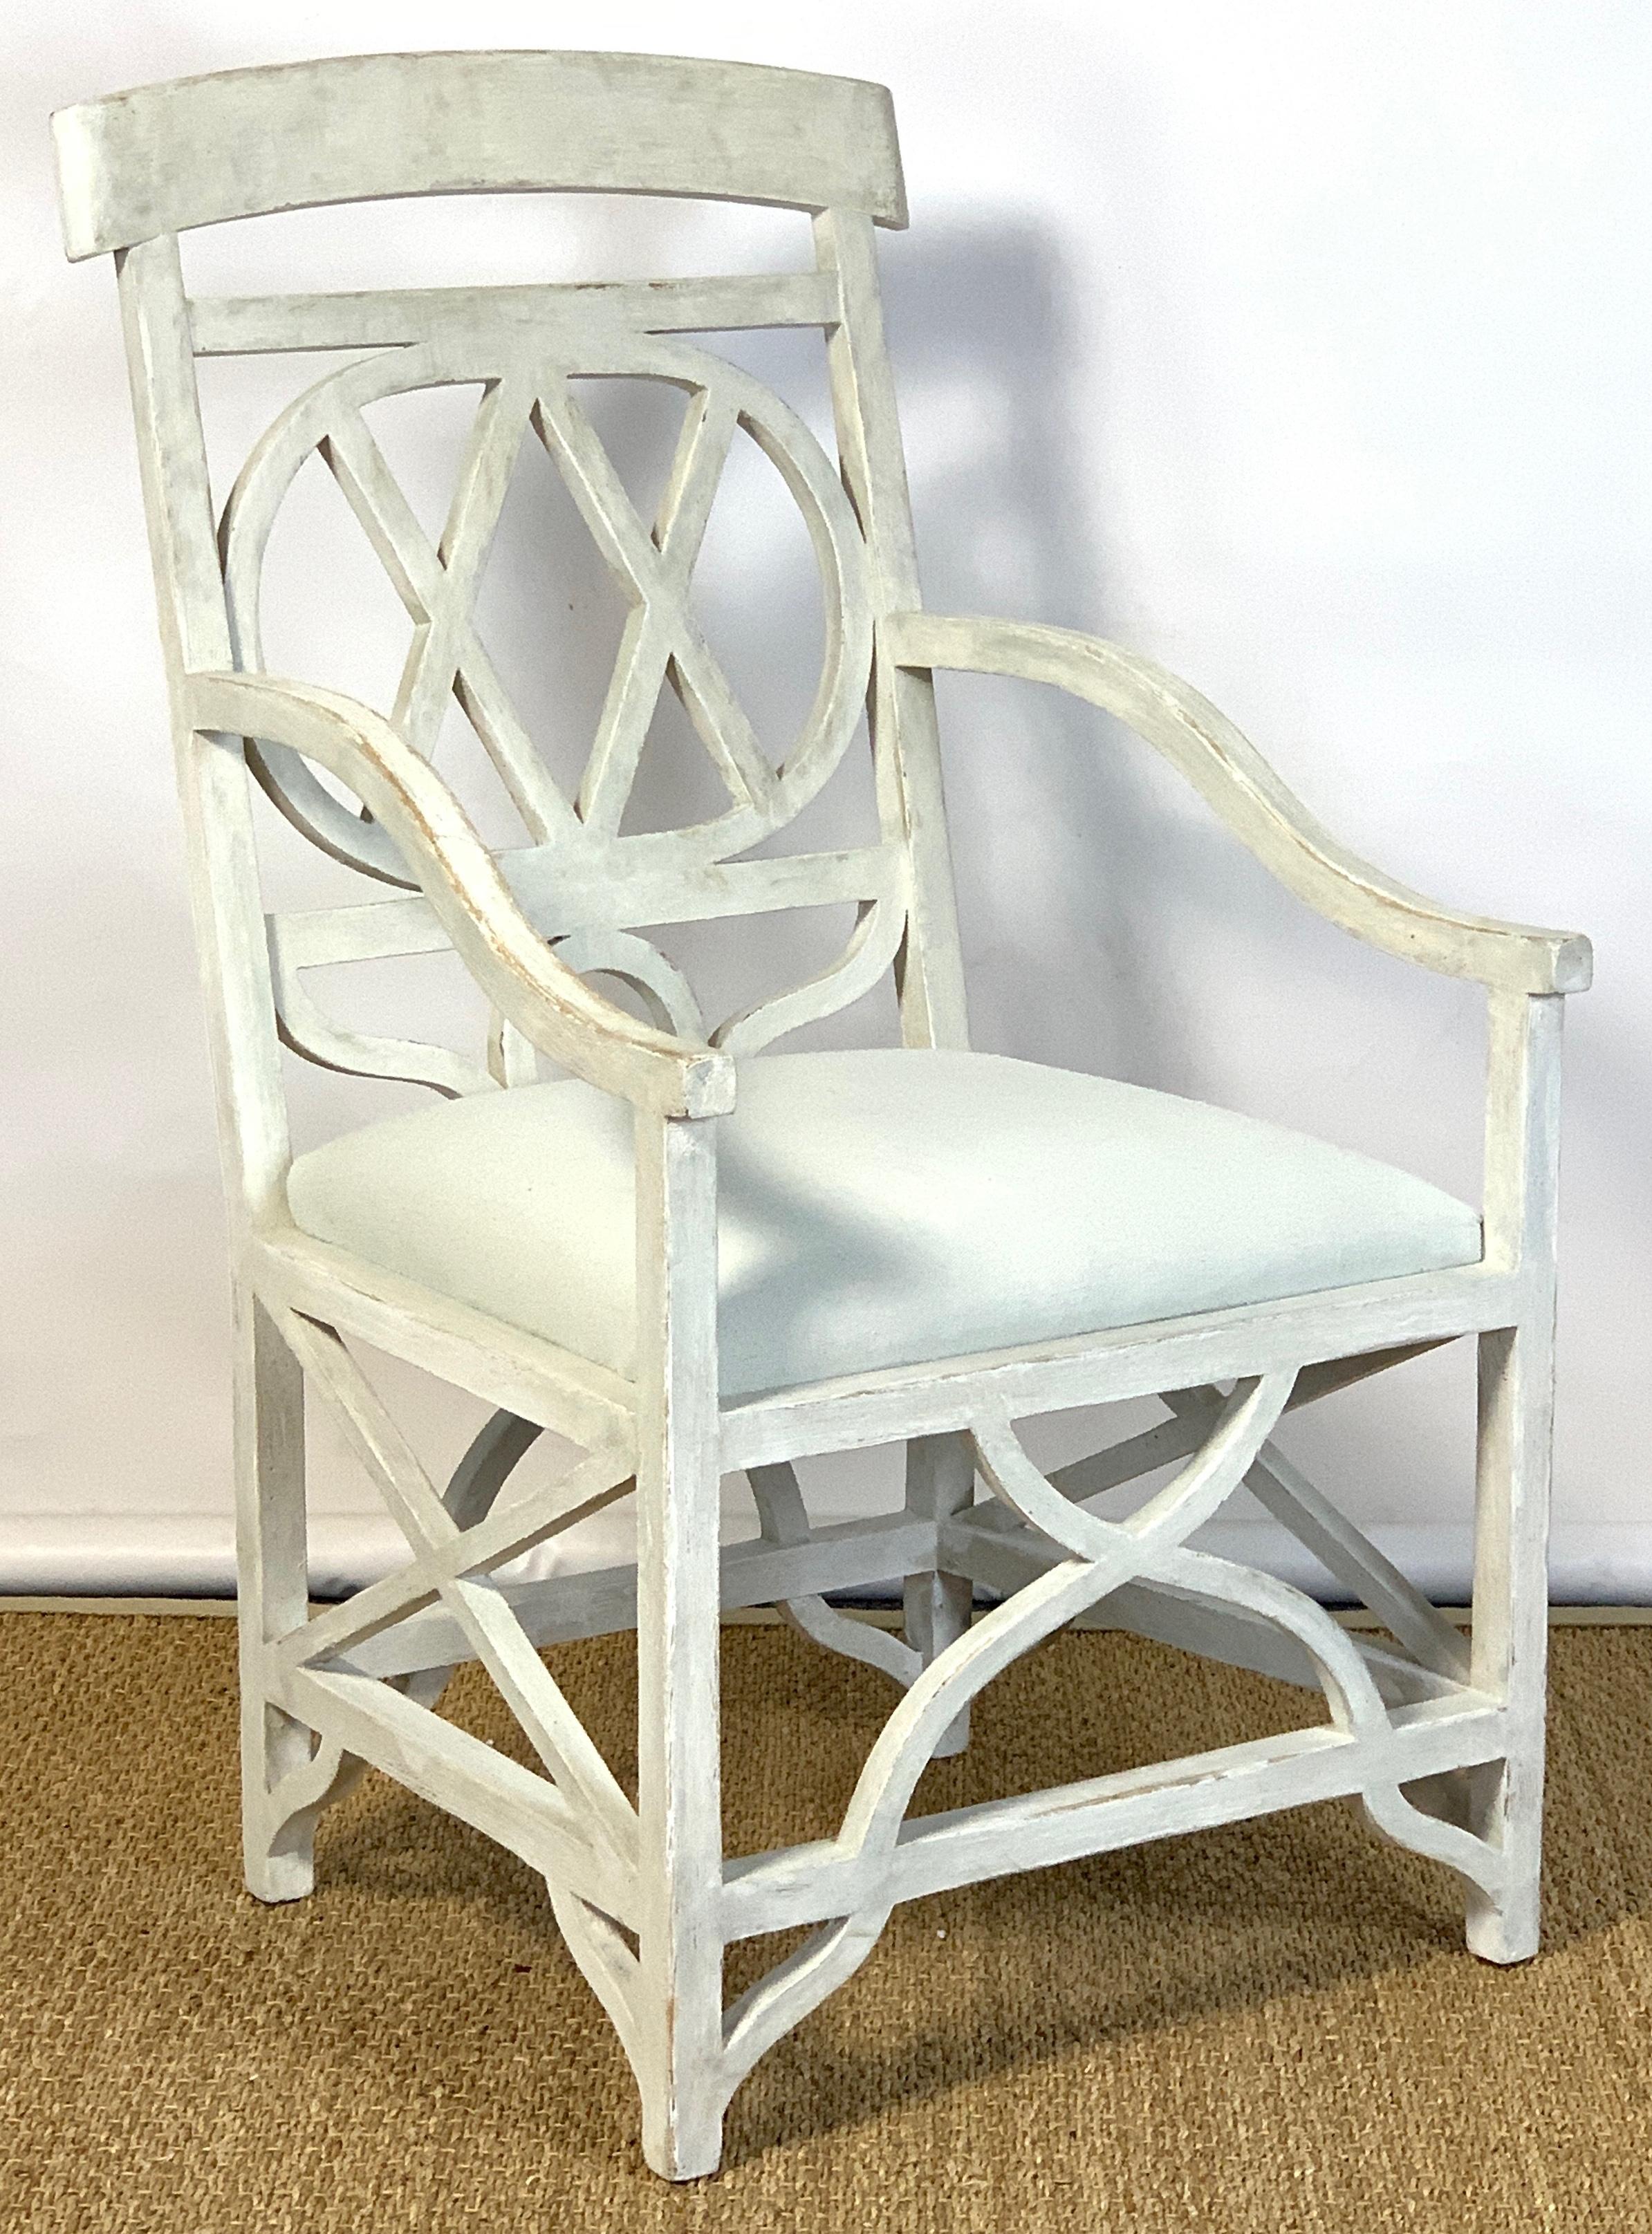 A very stylish and unusual, mid-20th century. Armchair custom painted in a distressed soft white finish. Appears to be built of solid white oak.